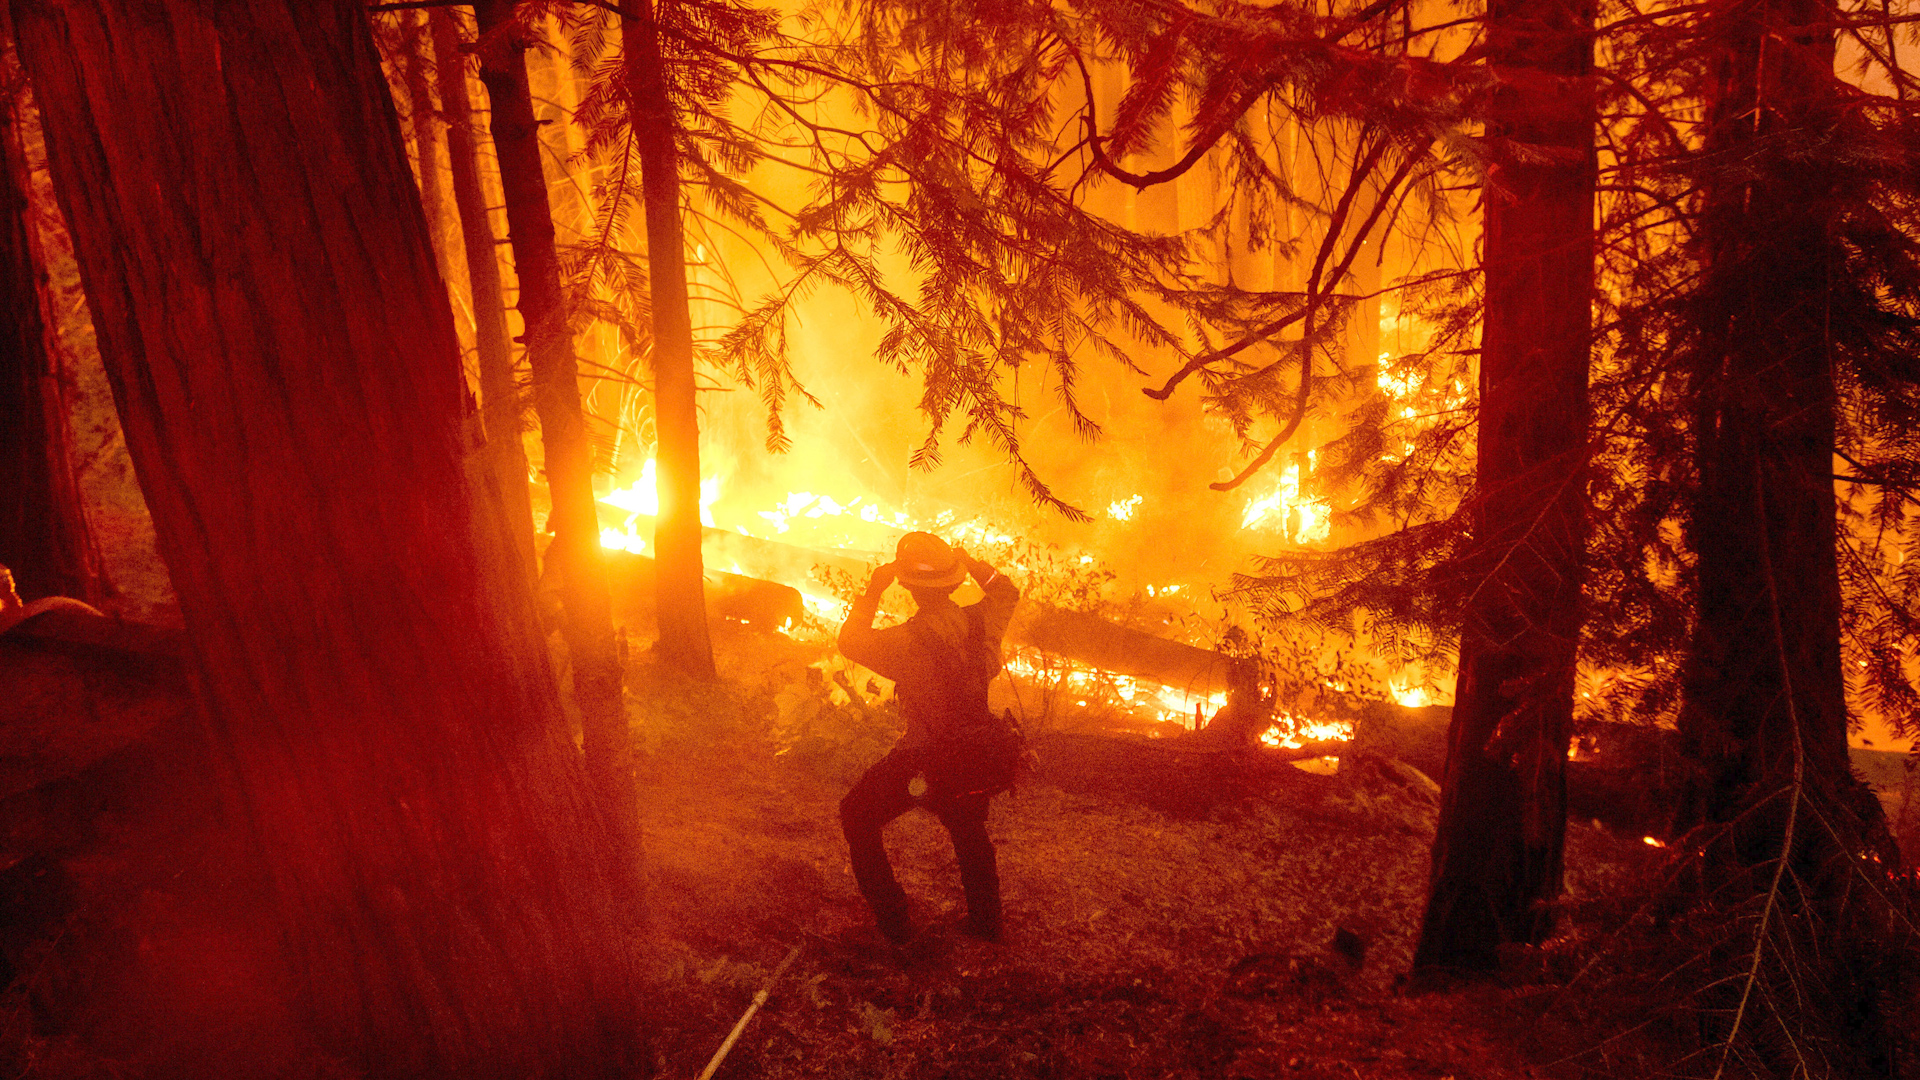 The Energy 202 California S Fires Are Putting A Huge Amount Of Carbon Dioxide Into The Air The Washington Post